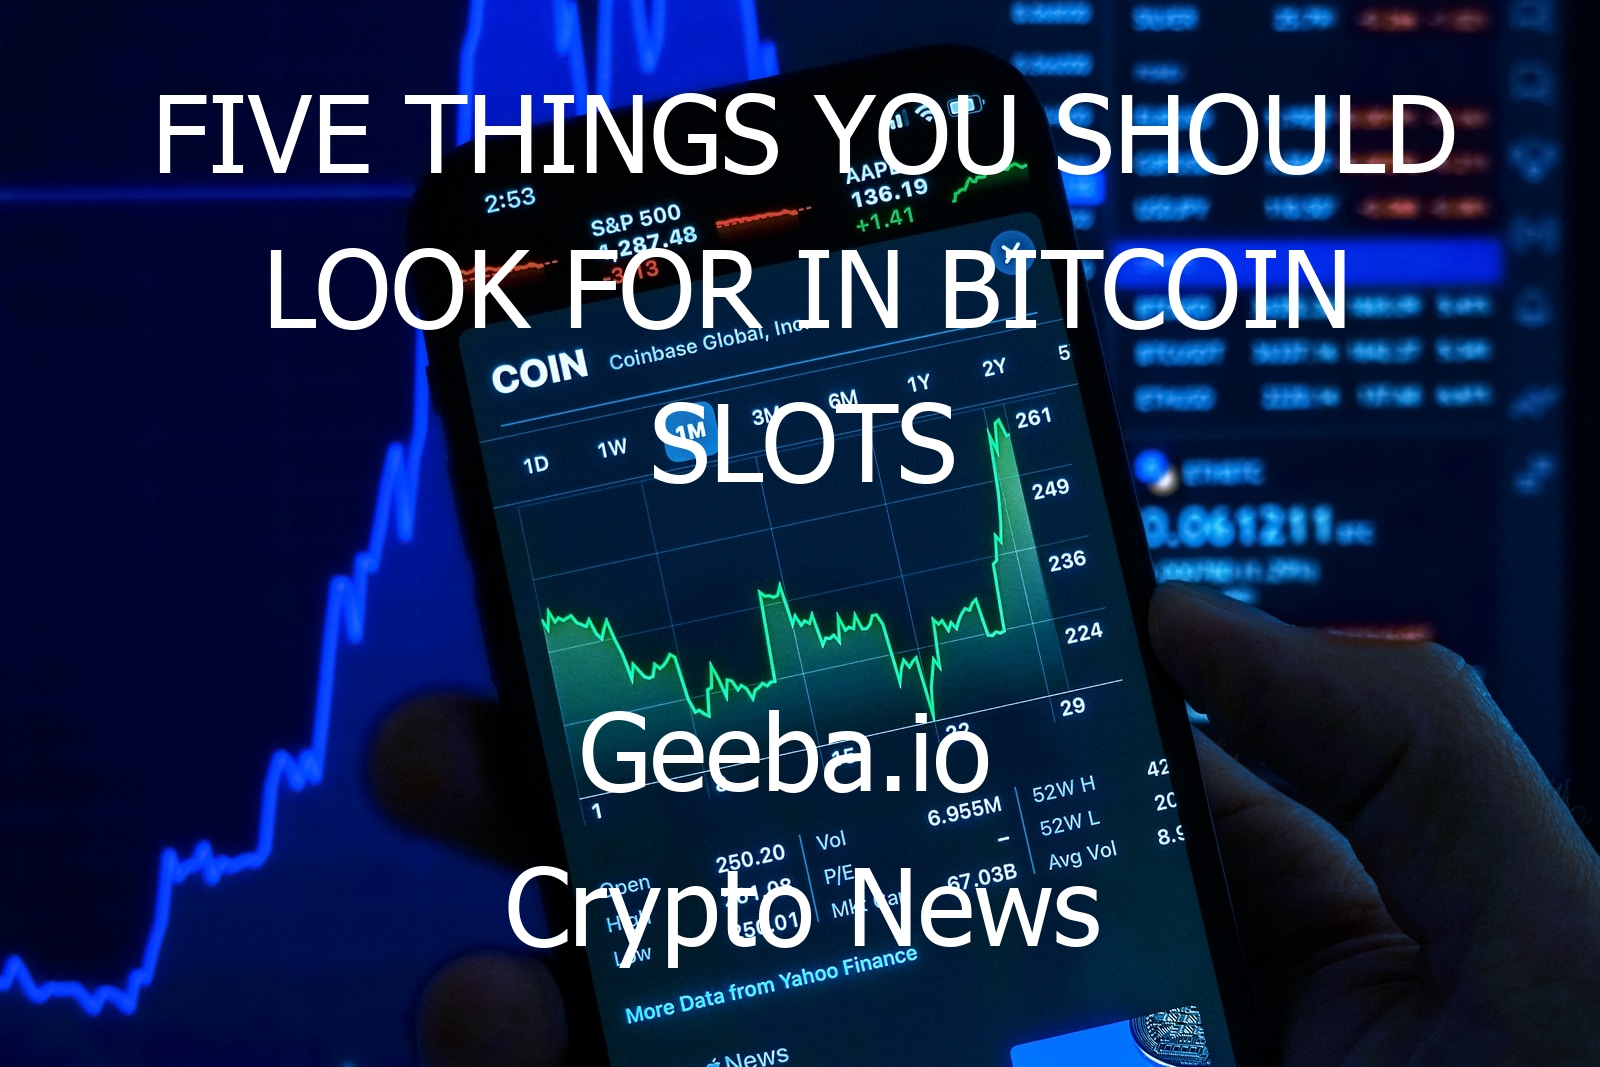 five things you should look for in bitcoin slots 7224